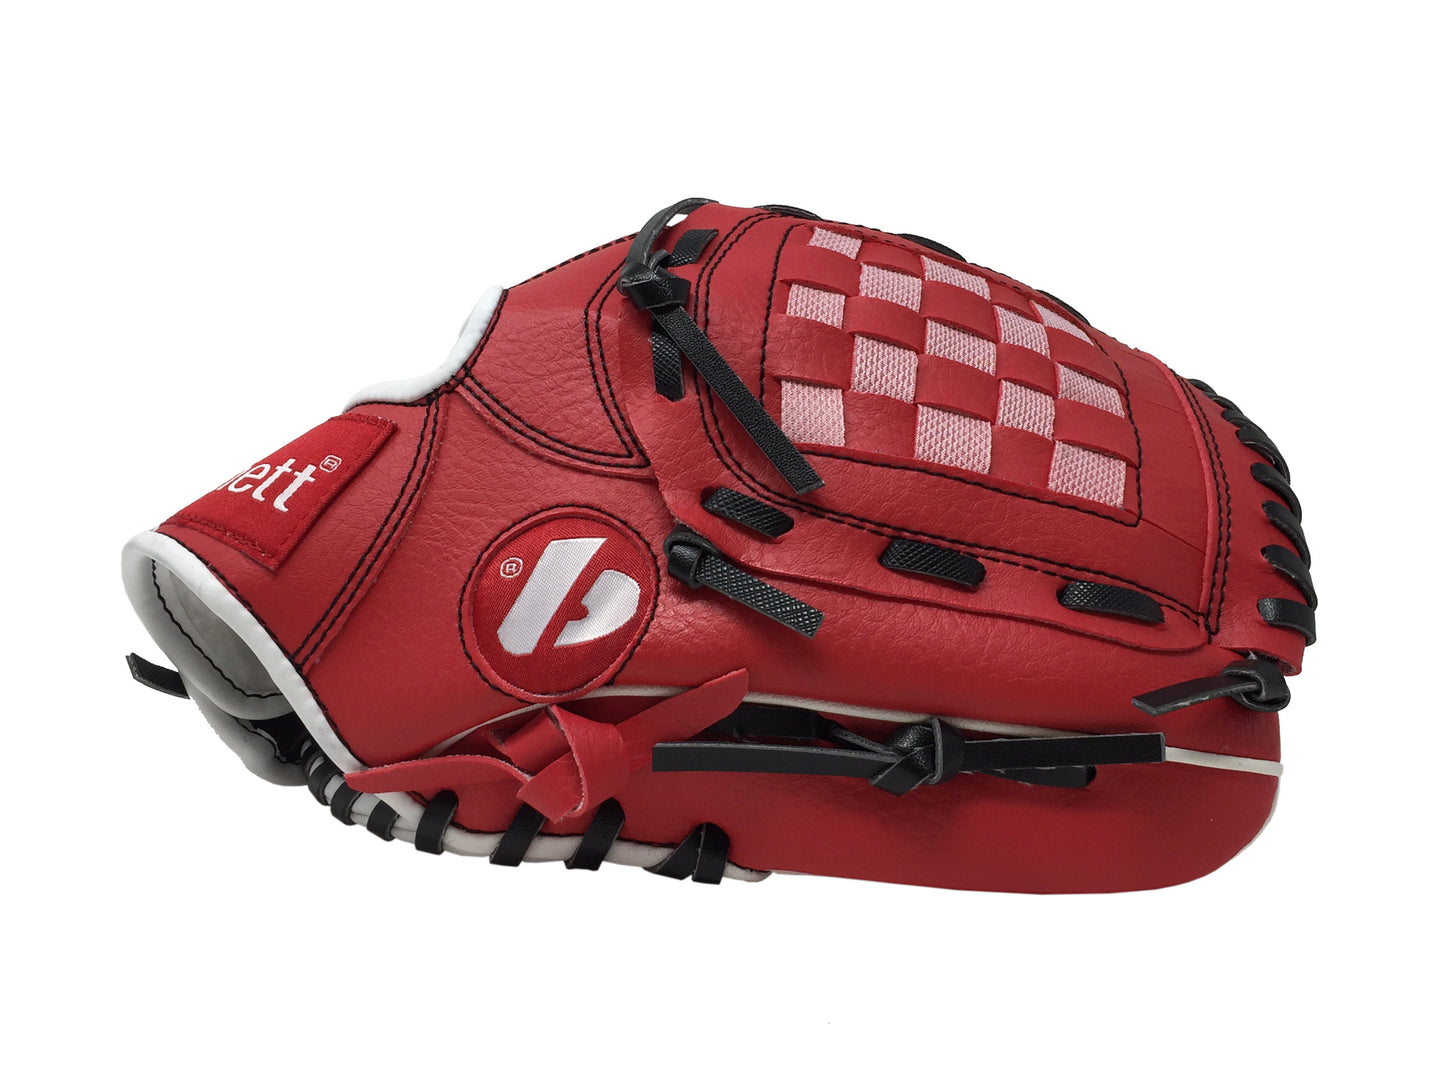 JL-105 - Baseball glove, outfield, polyurethane, size 10.5 ", Red color (Right Hand Throw)